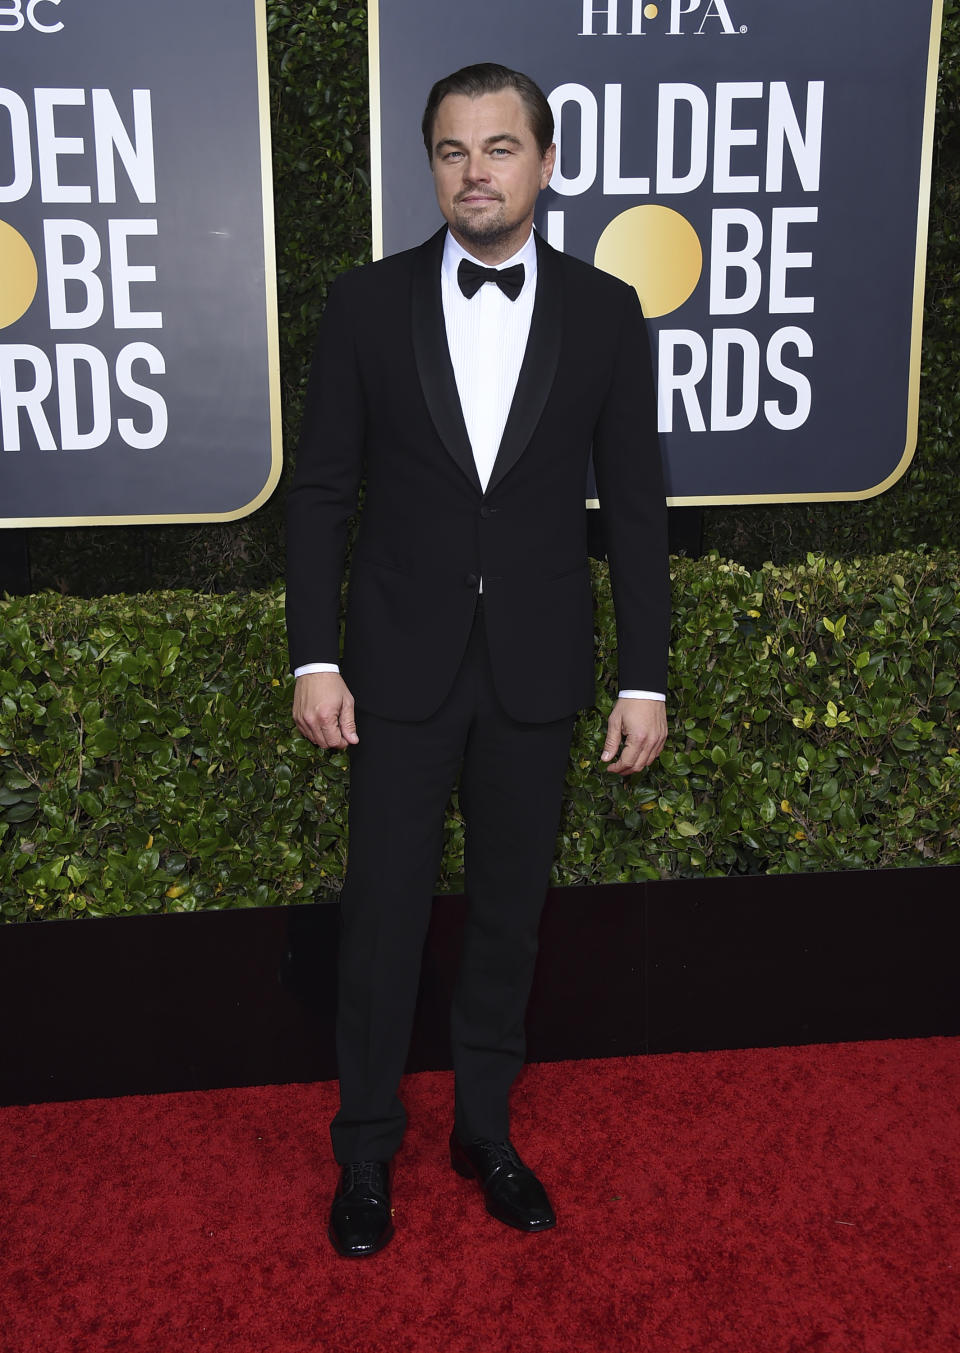 Leonardo DiCaprio arrives at the 77th annual Golden Globe Awards at the Beverly Hilton Hotel on Sunday, Jan. 5, 2020, in Beverly Hills, Calif. (Photo by Jordan Strauss/Invision/AP)